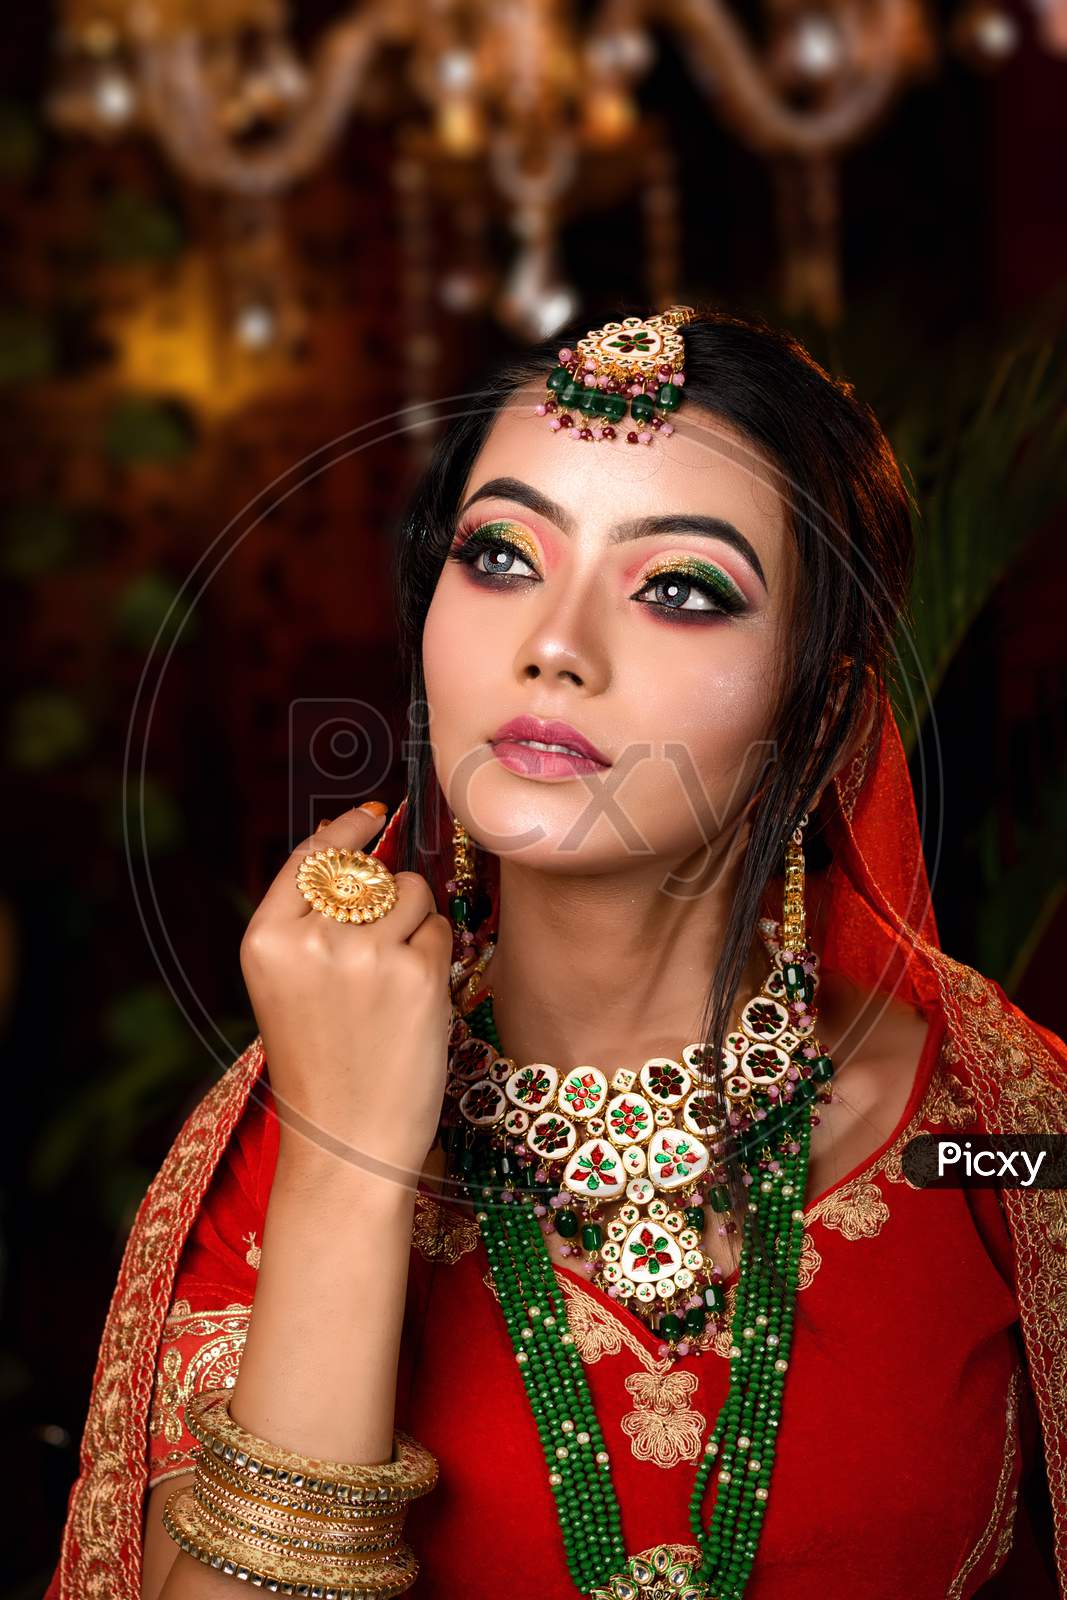 Close Up Portrait Of Very Beautiful Young Indian Bride In Luxurious Bridal Costume With Makeup And Heavy Jewellery In Studio Lighting Indoor. Wedding Fashion.